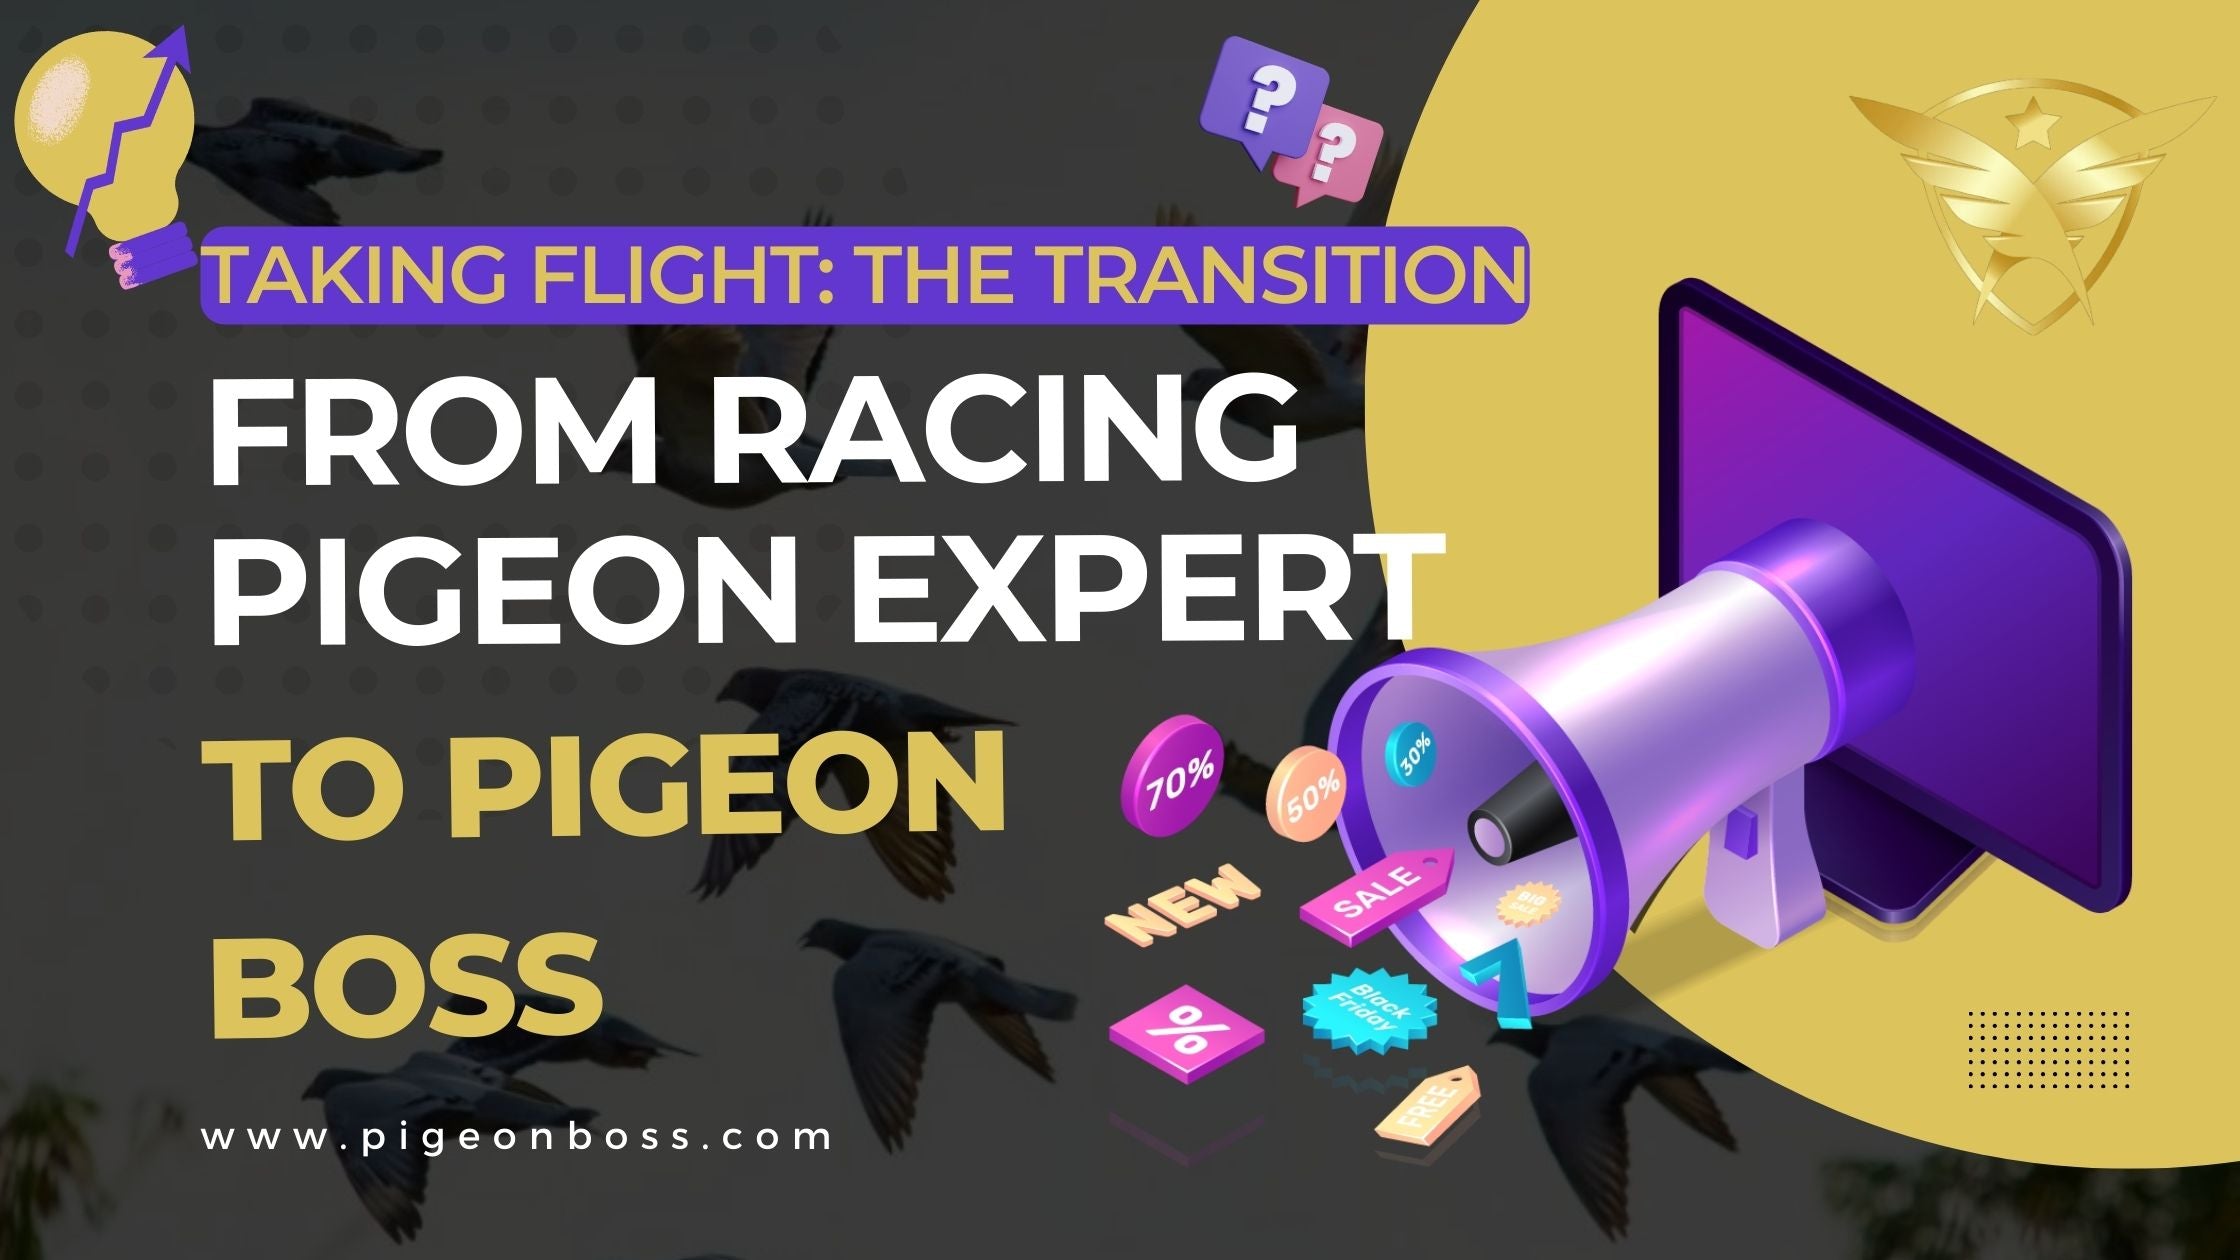 Taking Flight: The Transformation from Racing Pigeon Expert to Pigeon Boss